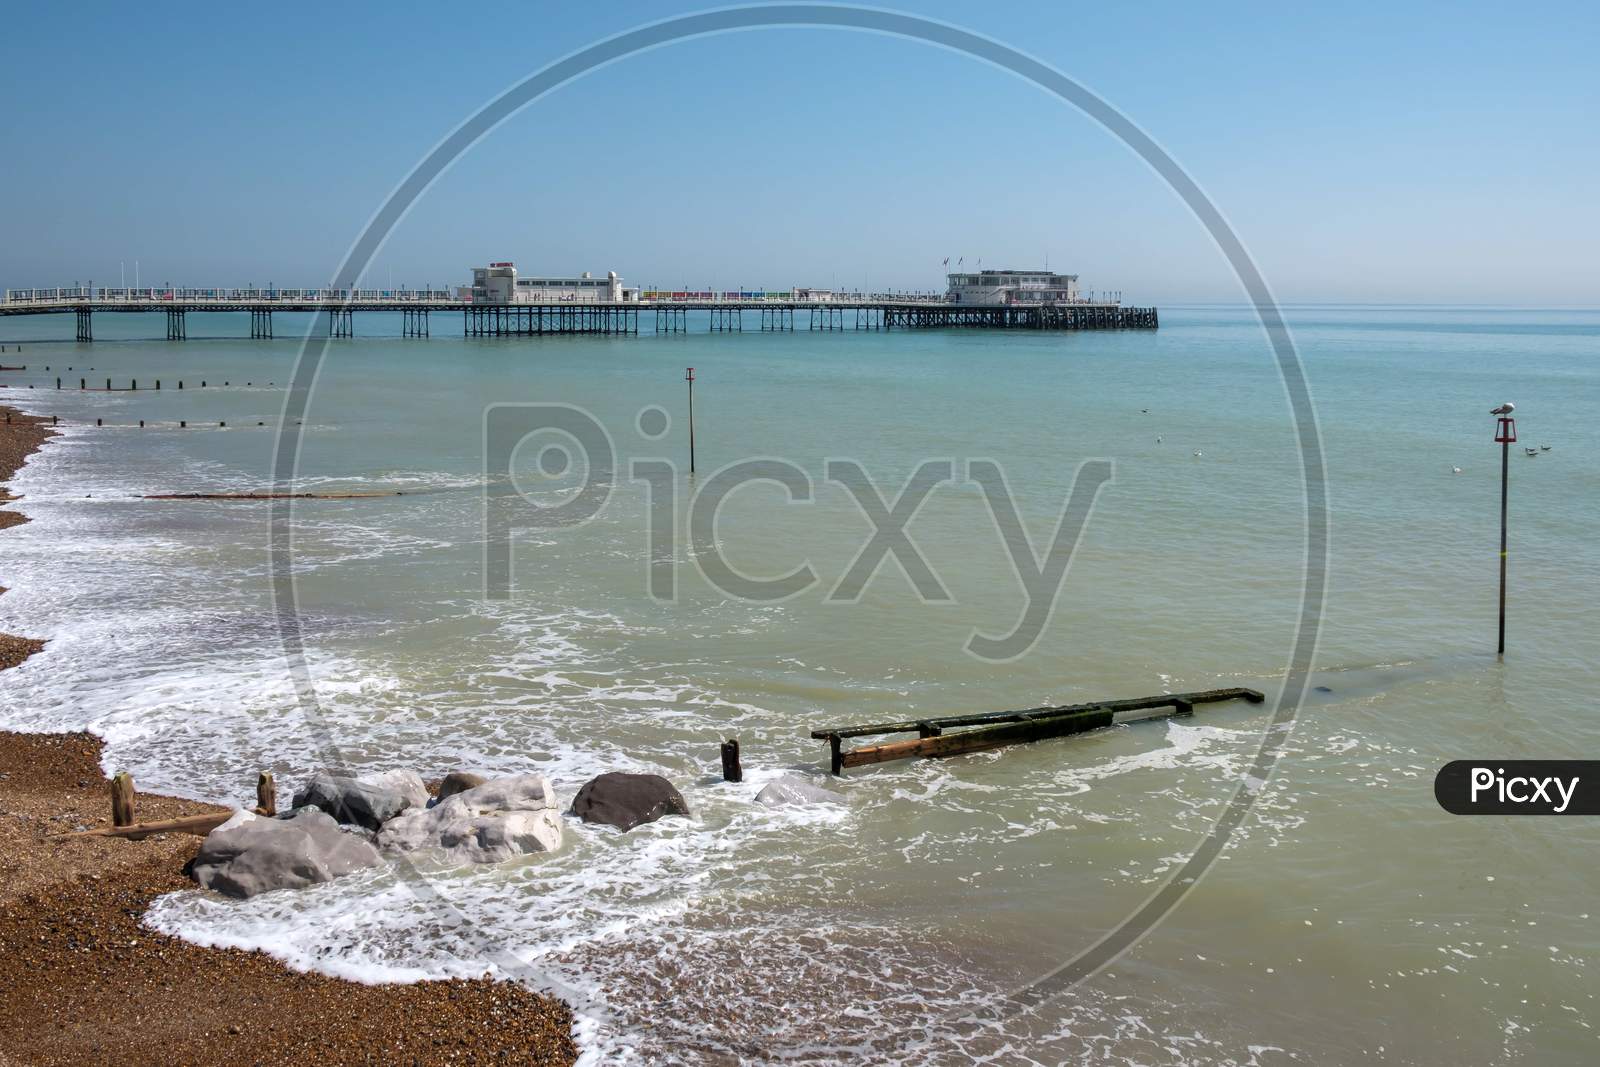 Worthing, West Sussex/Uk - April 20 : View Of Worthing Pier In West Sussex On April 20, 2018